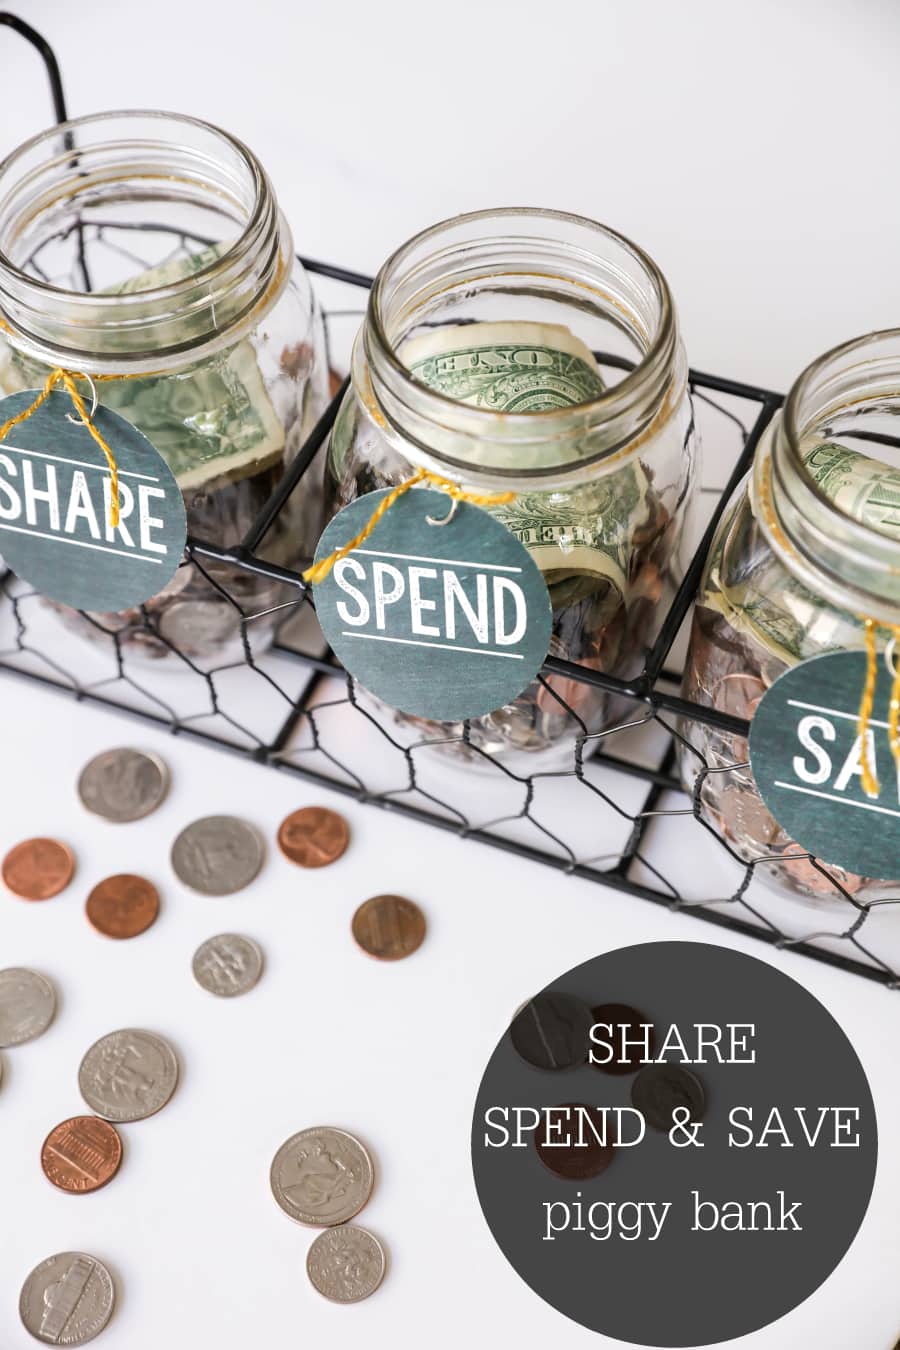 FREE SHARE, SPEND, SAVE tags to help teach your family how to manage money and also give back!